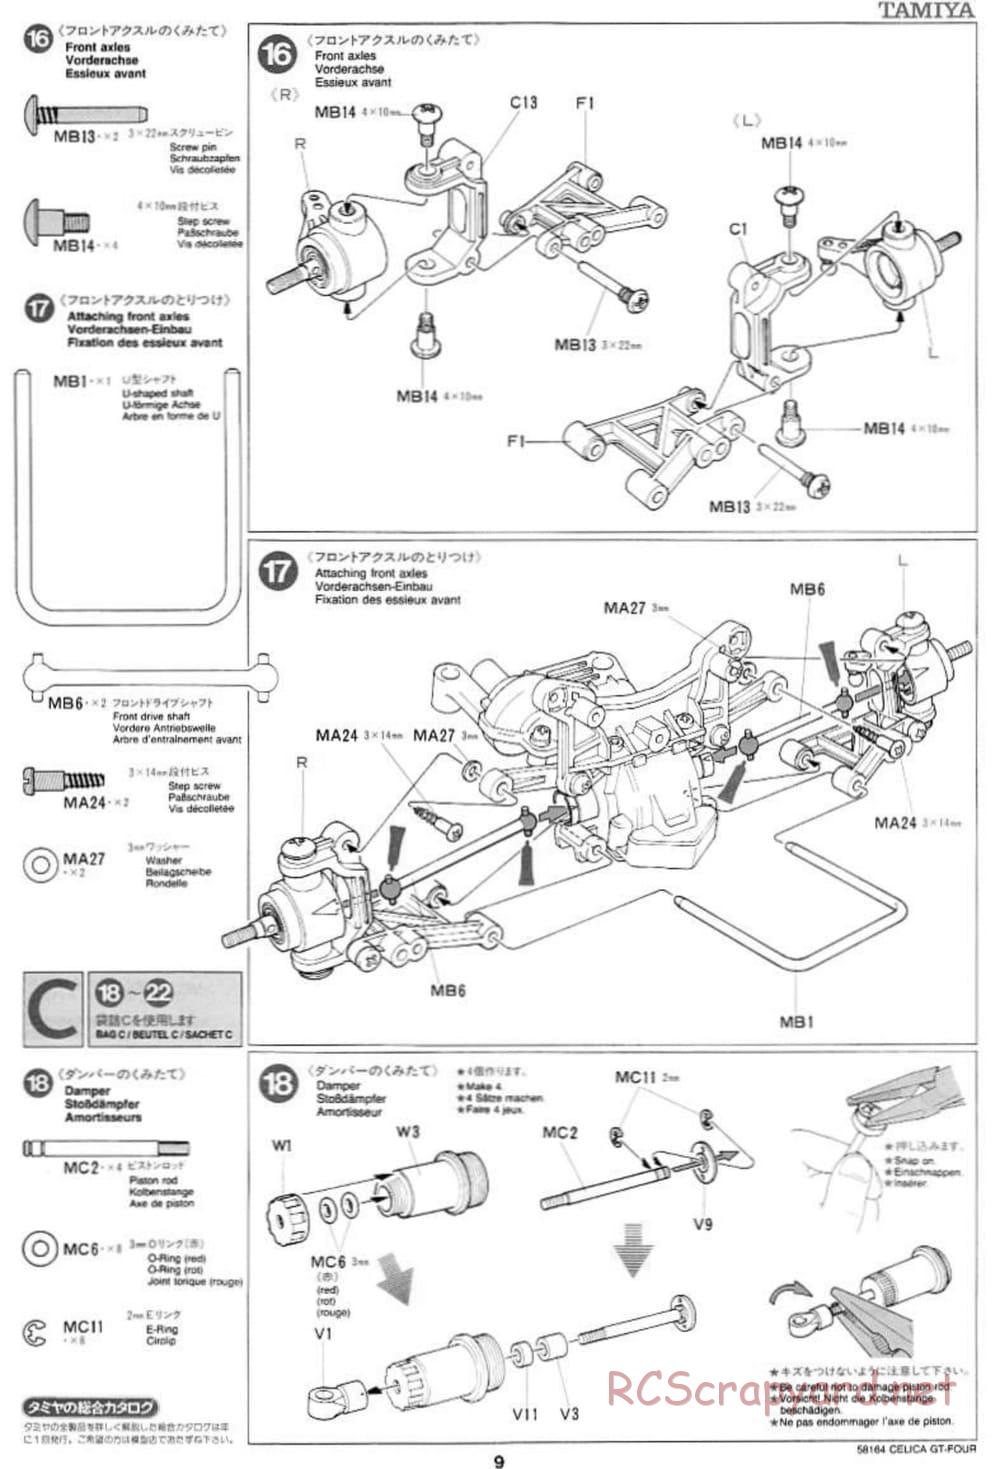 Tamiya - Toyota Celica GT Four - TA-02 Chassis - Manual - Page 9